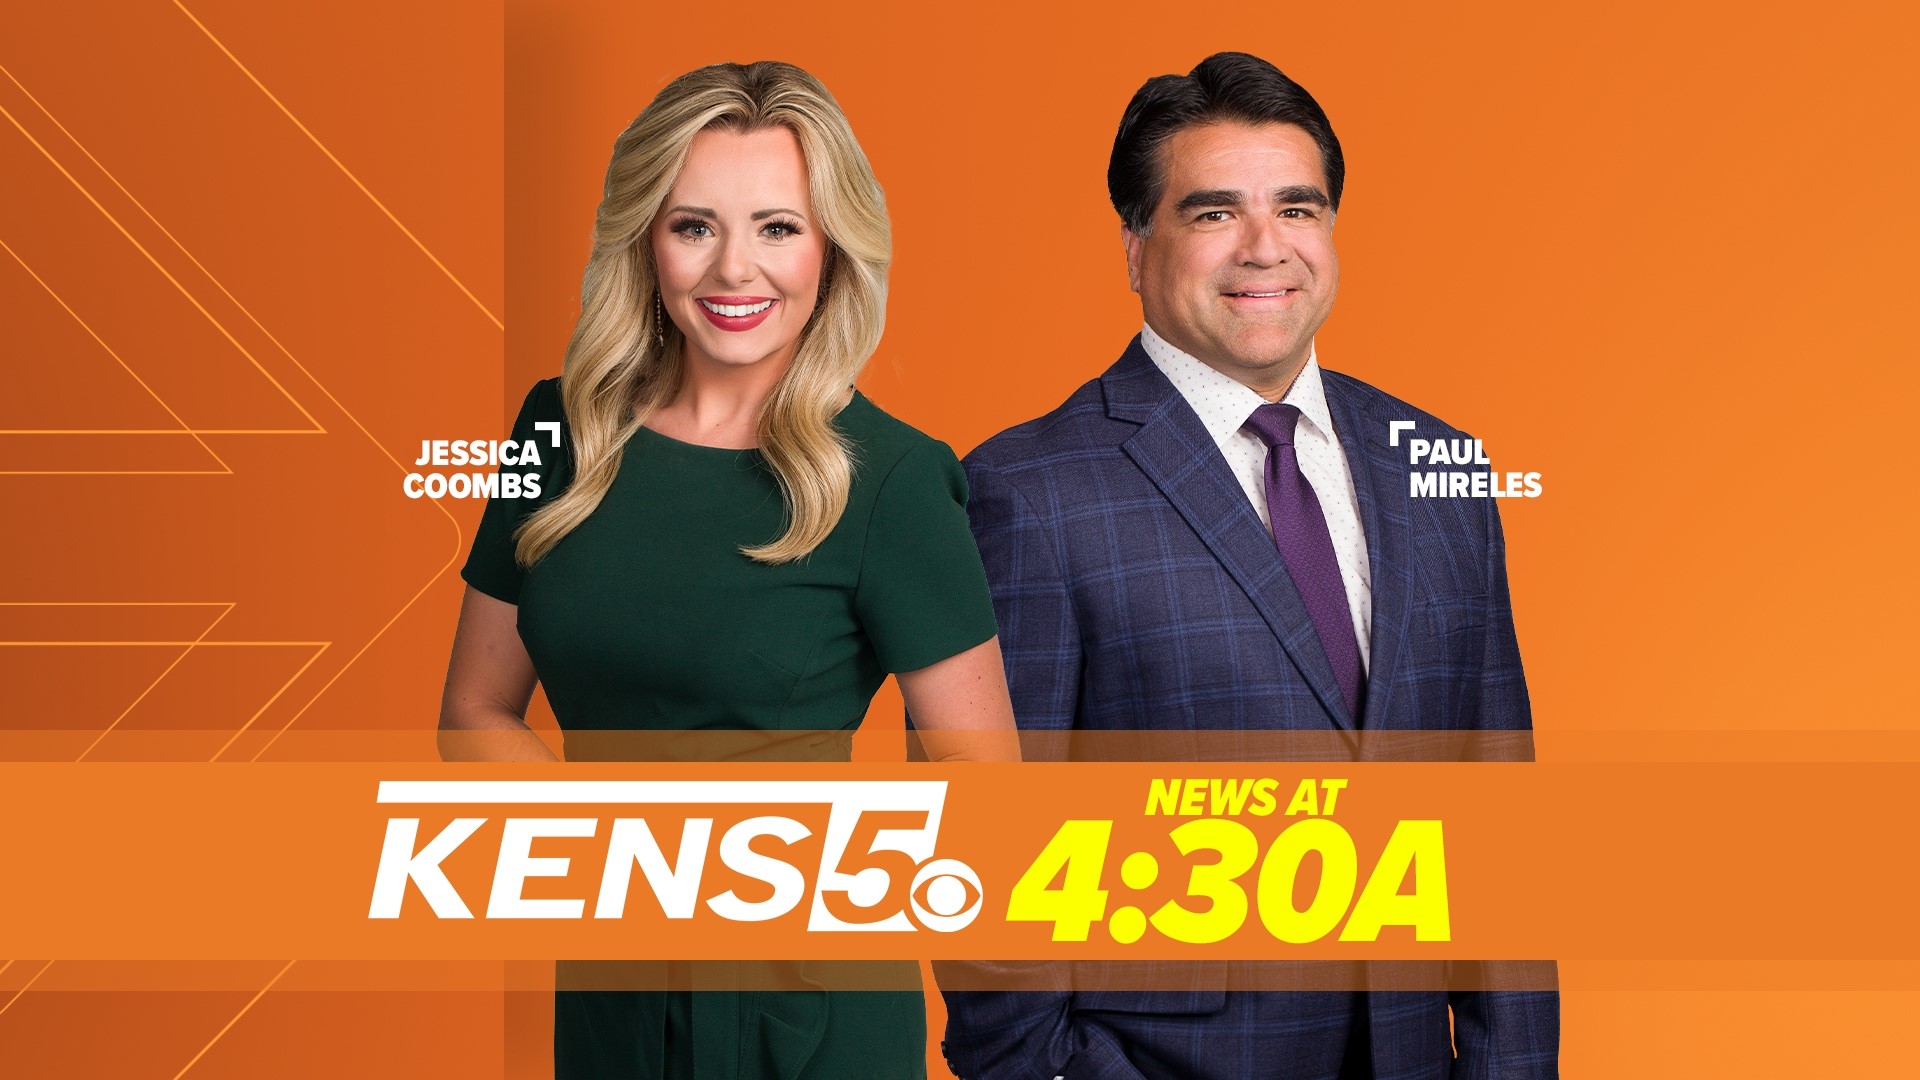 KENS 5 News brings you the latest San Antonio news reports, plus your local weather forecast, sports and traffic updates.